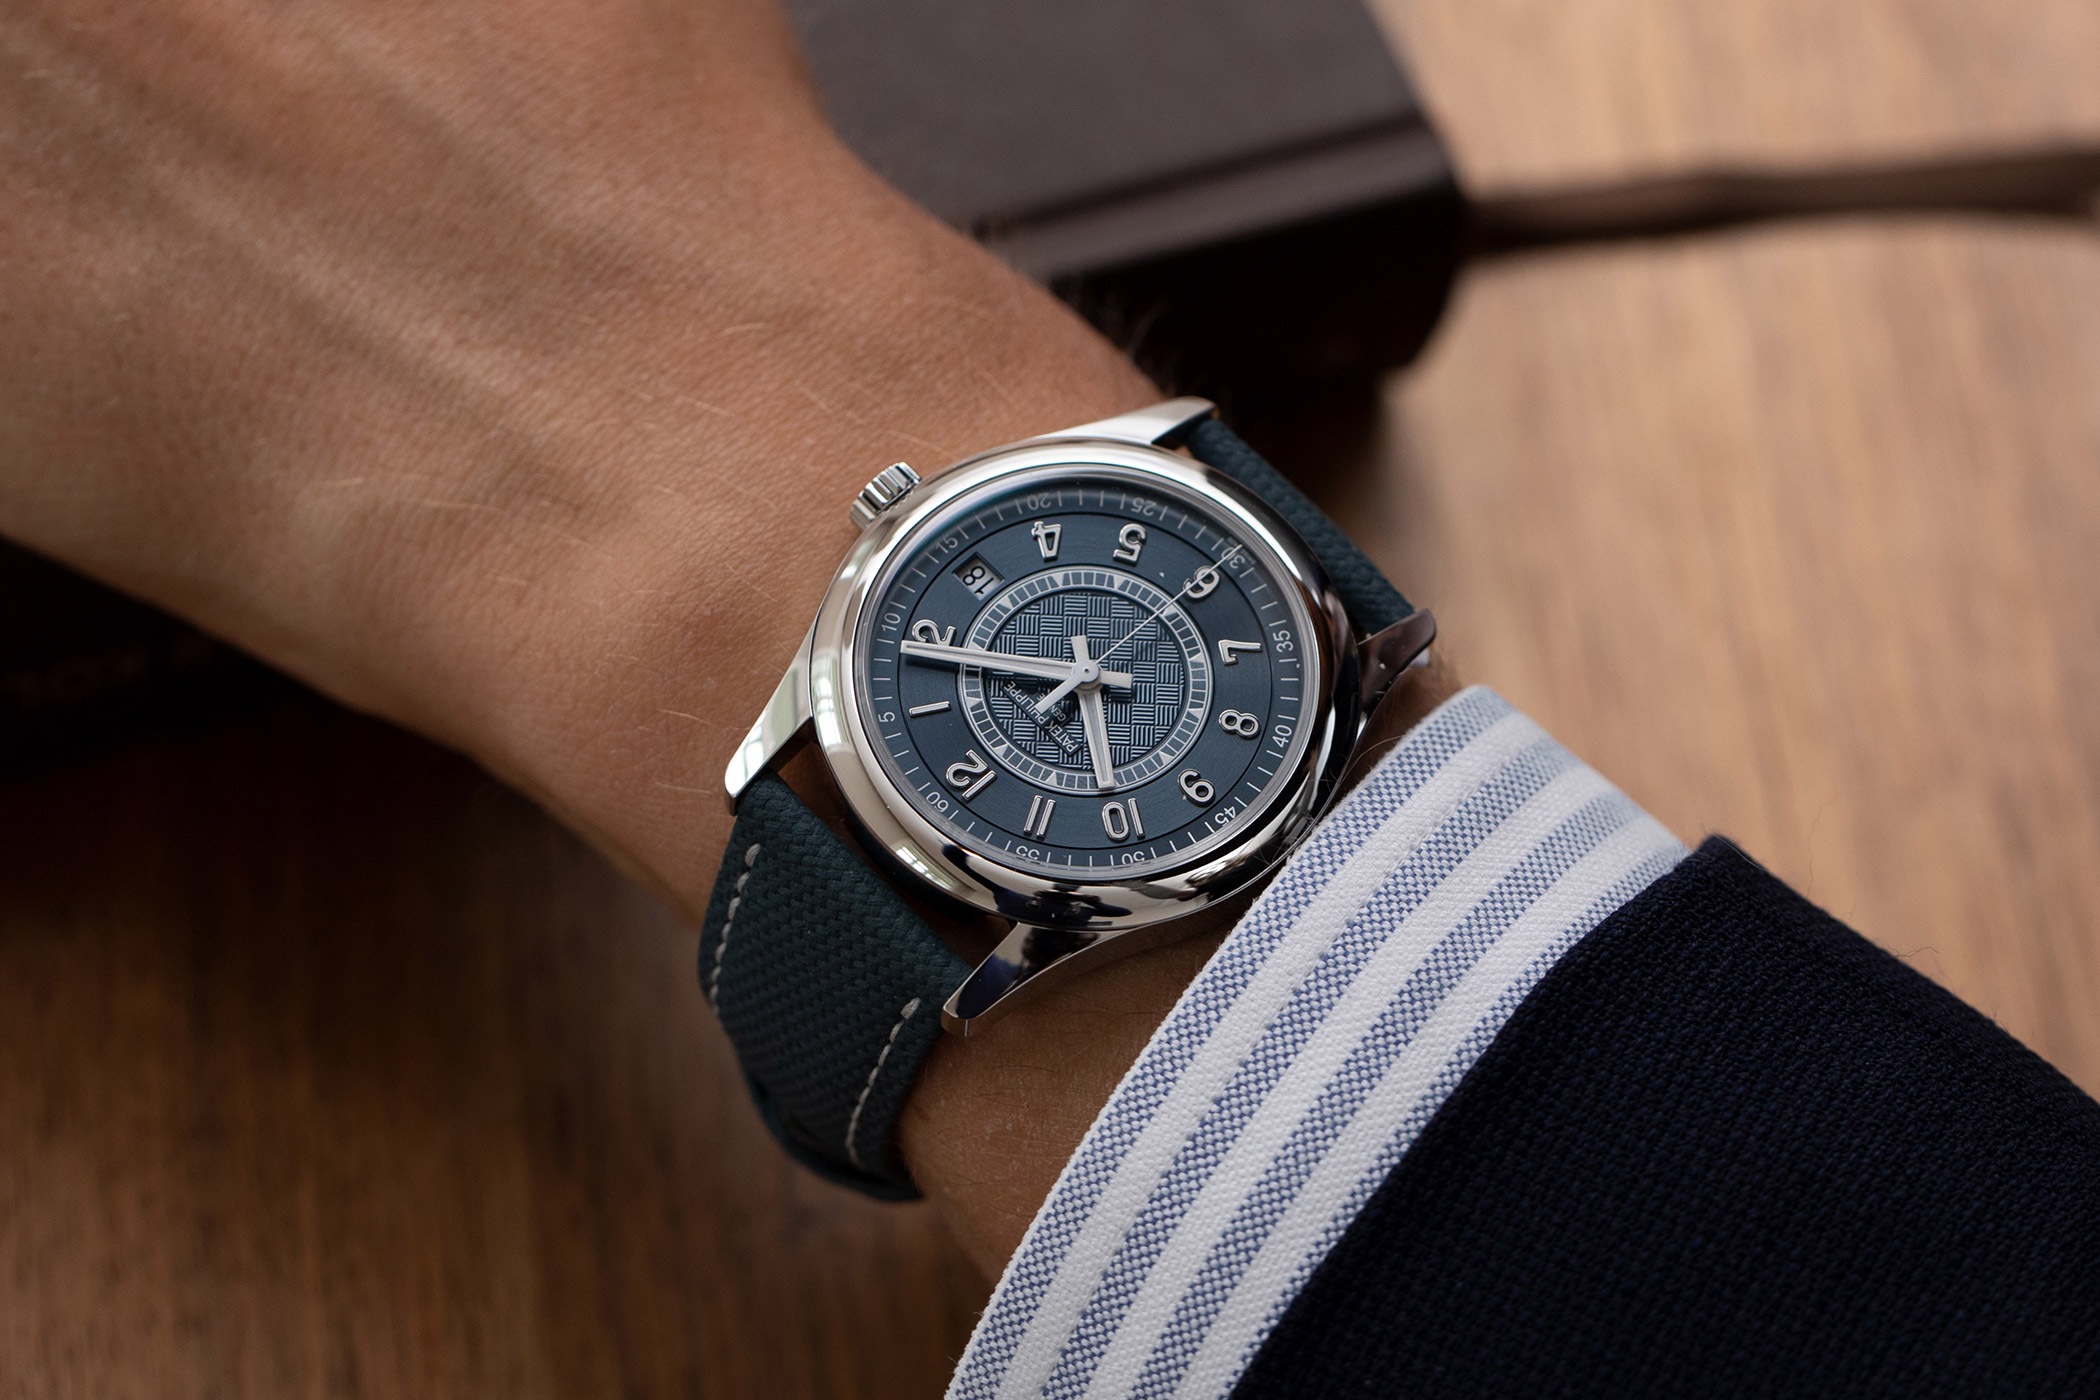 First Look: Patek Philippe Delivers Color And Sportiness With The Calatrava  6007G Watch